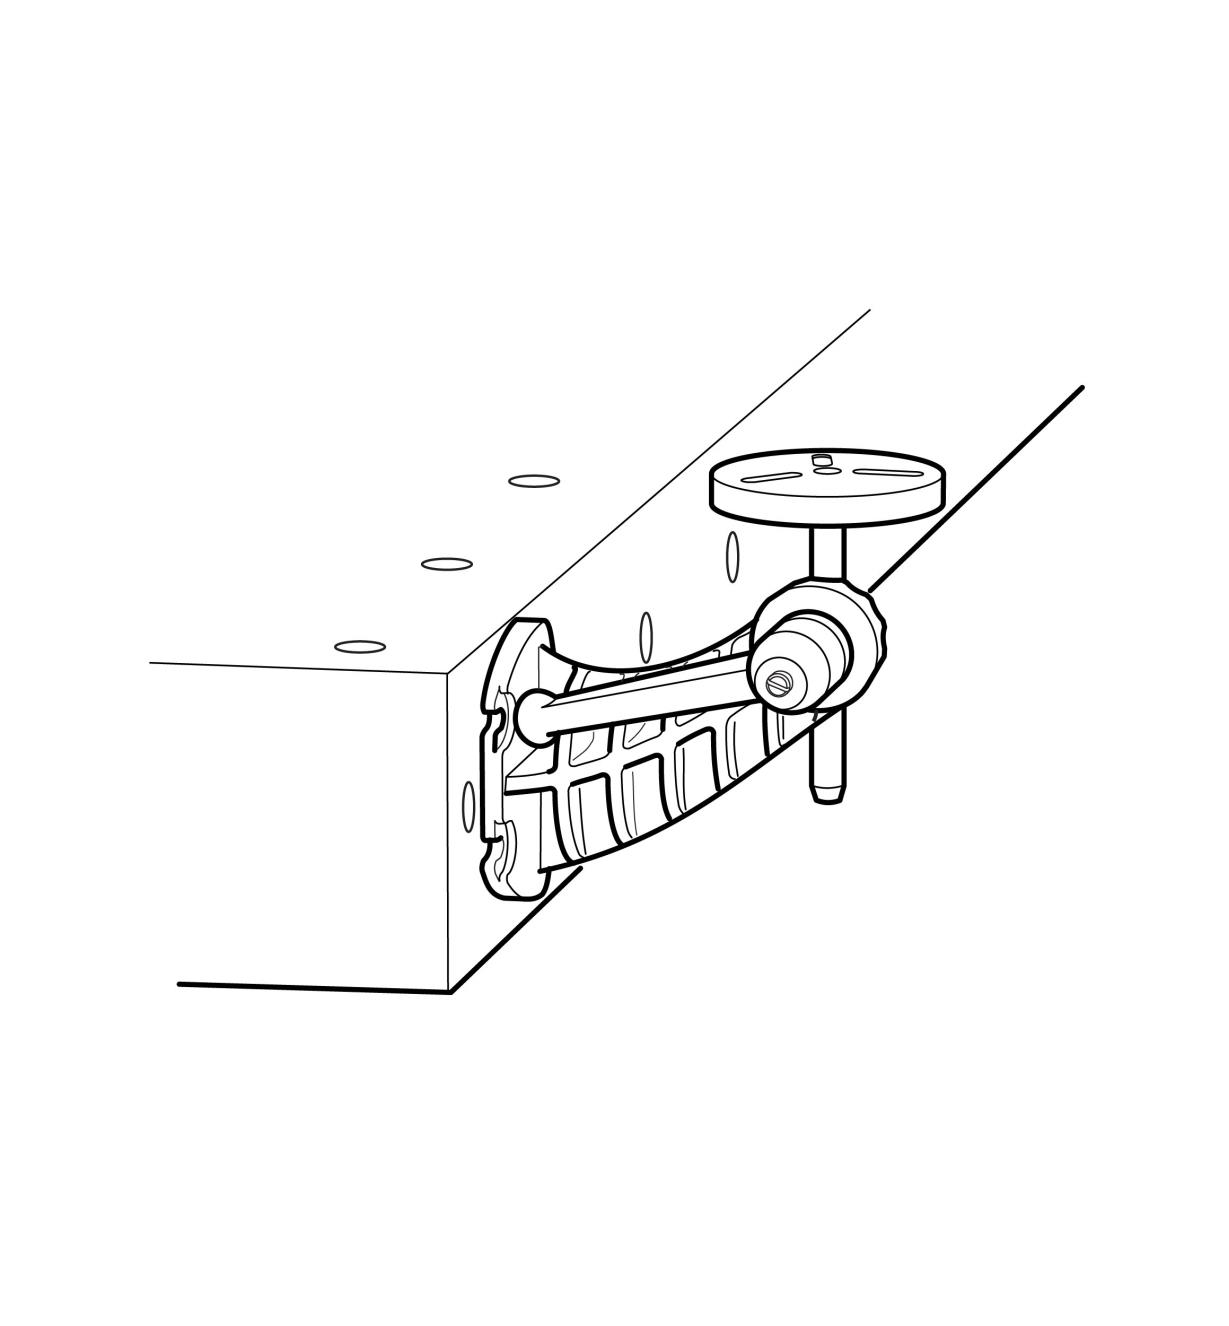 Illustration of the vise bolted to the side of a bench